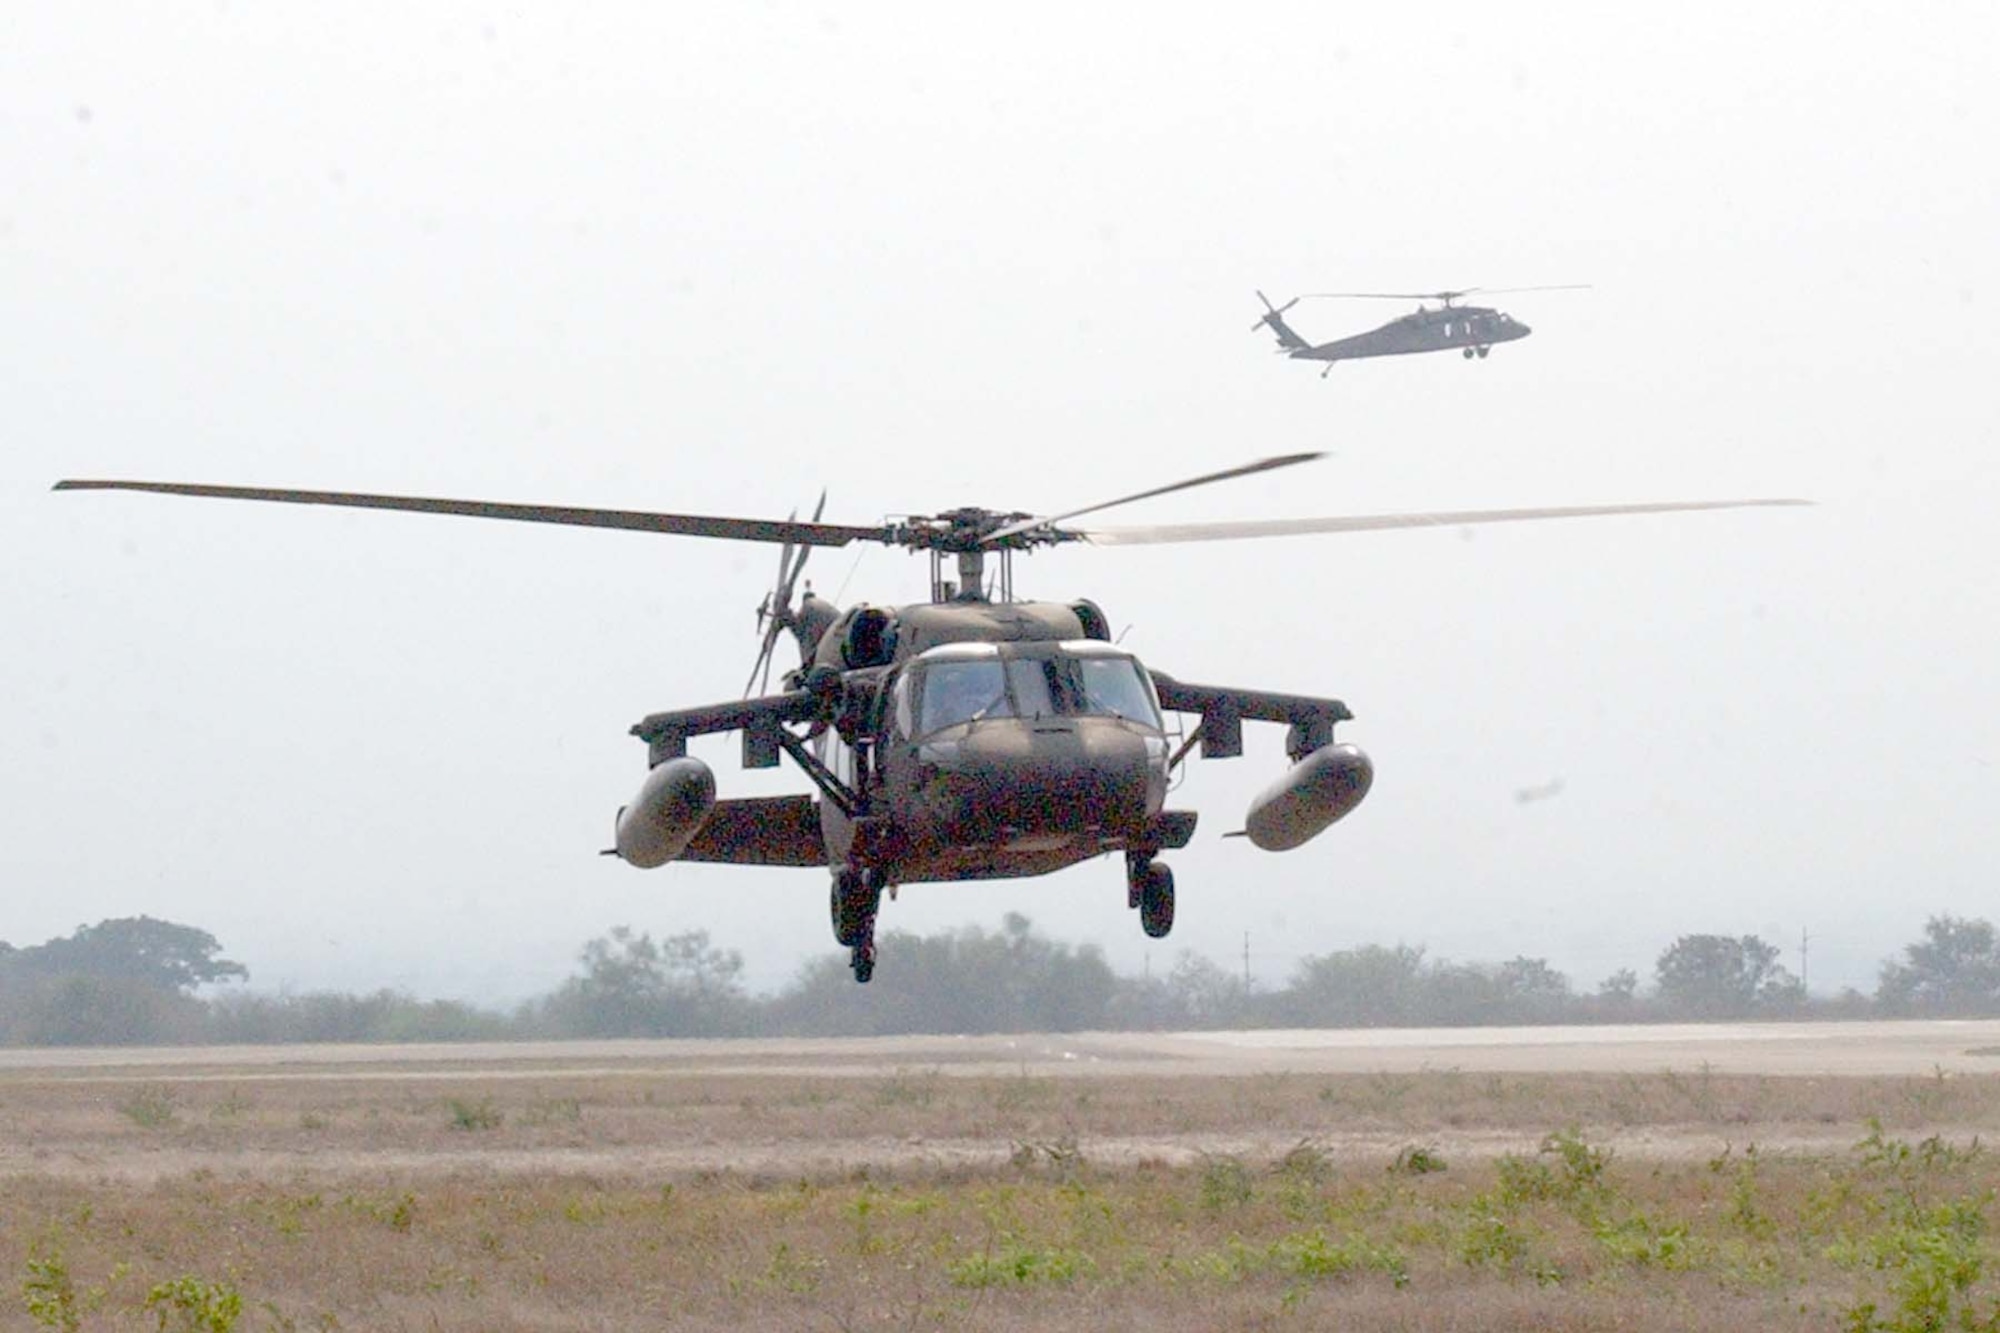 SOTO CANO AIR BASE, REPUBLIC OF HONDURAS -- A 1-228th Aviation Regiment Blackhawk helicopter is marshalled in to the Forward Aerial Refueling Point (FARP) set up this week to train helicopter aircrew and POL Soldiers on proper 'hot' refueling procedures with FARP equipment, while another waits in the background for it's opportunity to refuel. (U.S Air Force photo by Staff Sgt. Chyenne A. Griffin) 